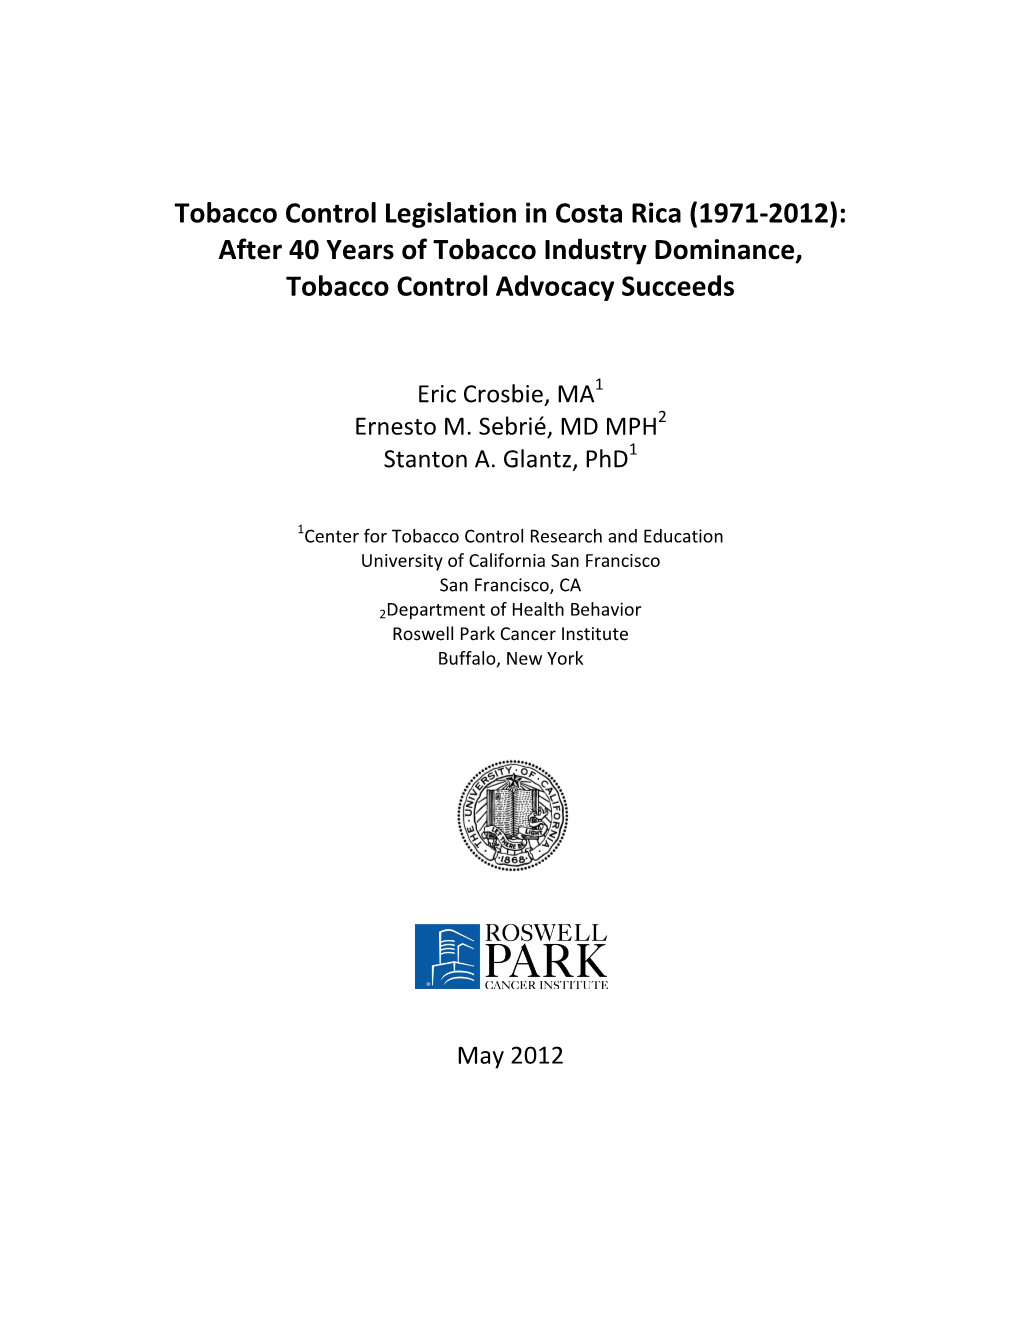 Tobacco Control Legislation in Costa Rica (1971-2012): After 40 Years of Tobacco Industry Dominance, Tobacco Control Advocacy Succeeds